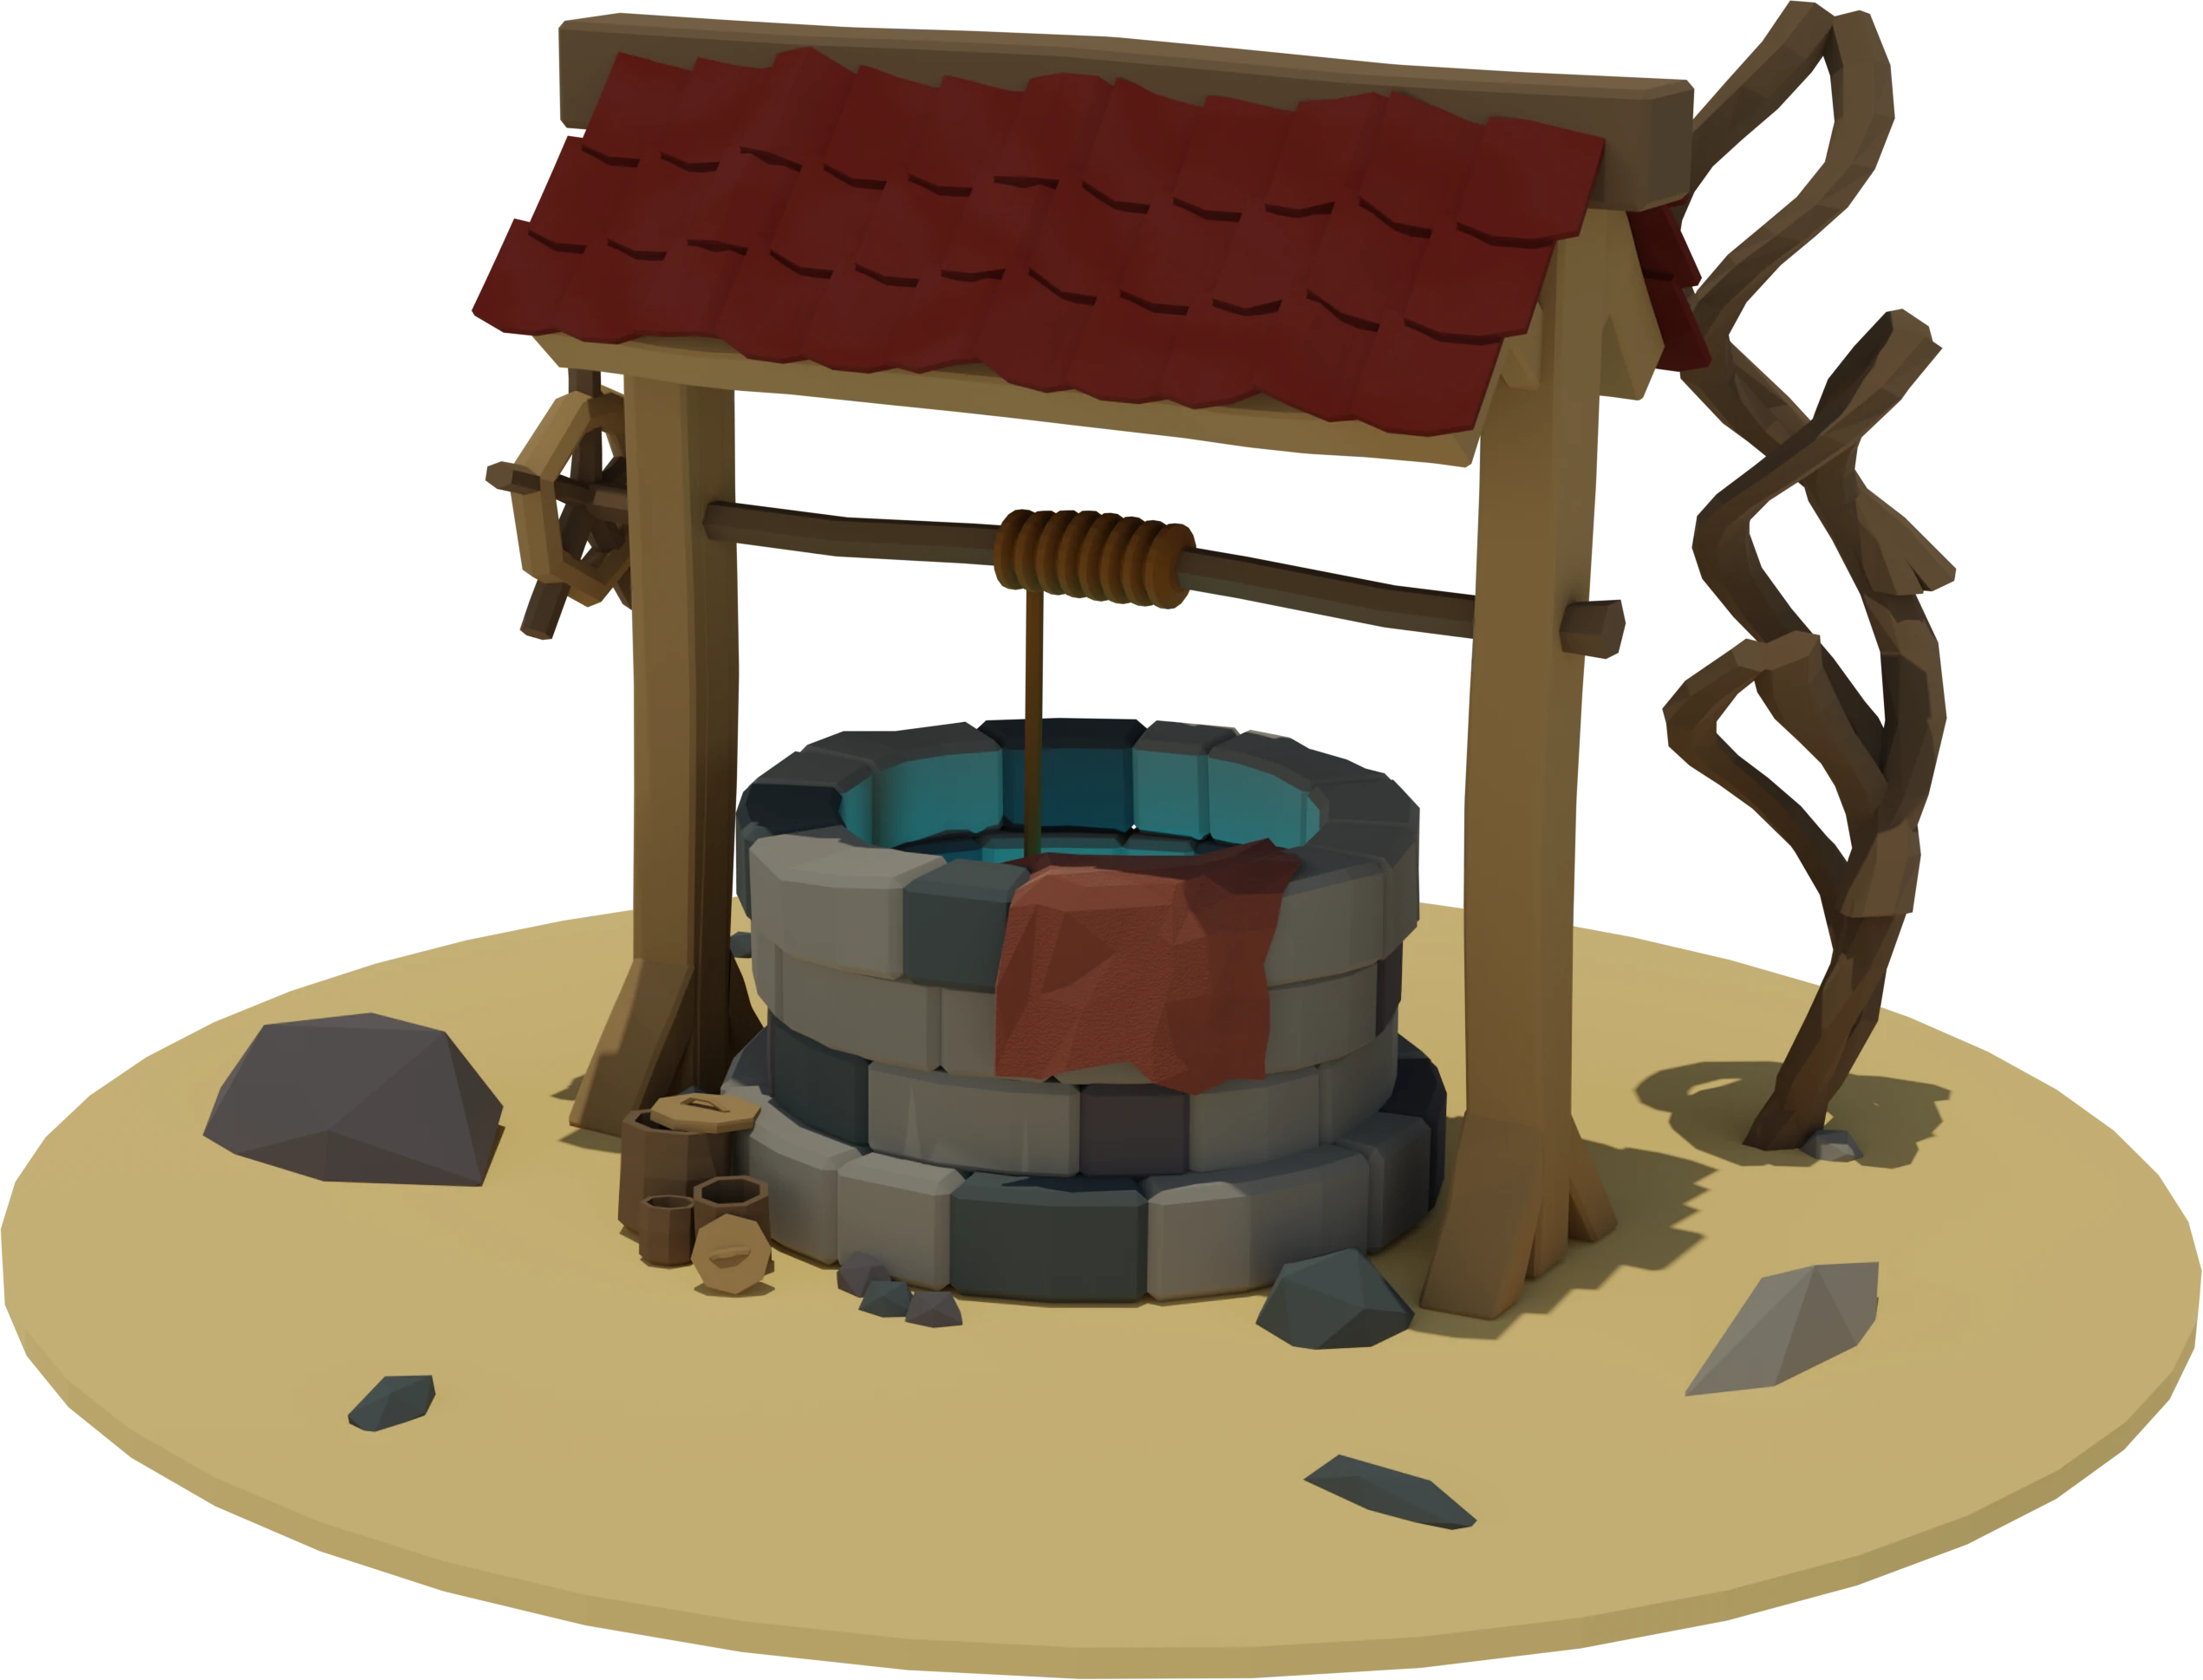 A 3D image of a glowing stylized well with a roof, some props and a dead tree.